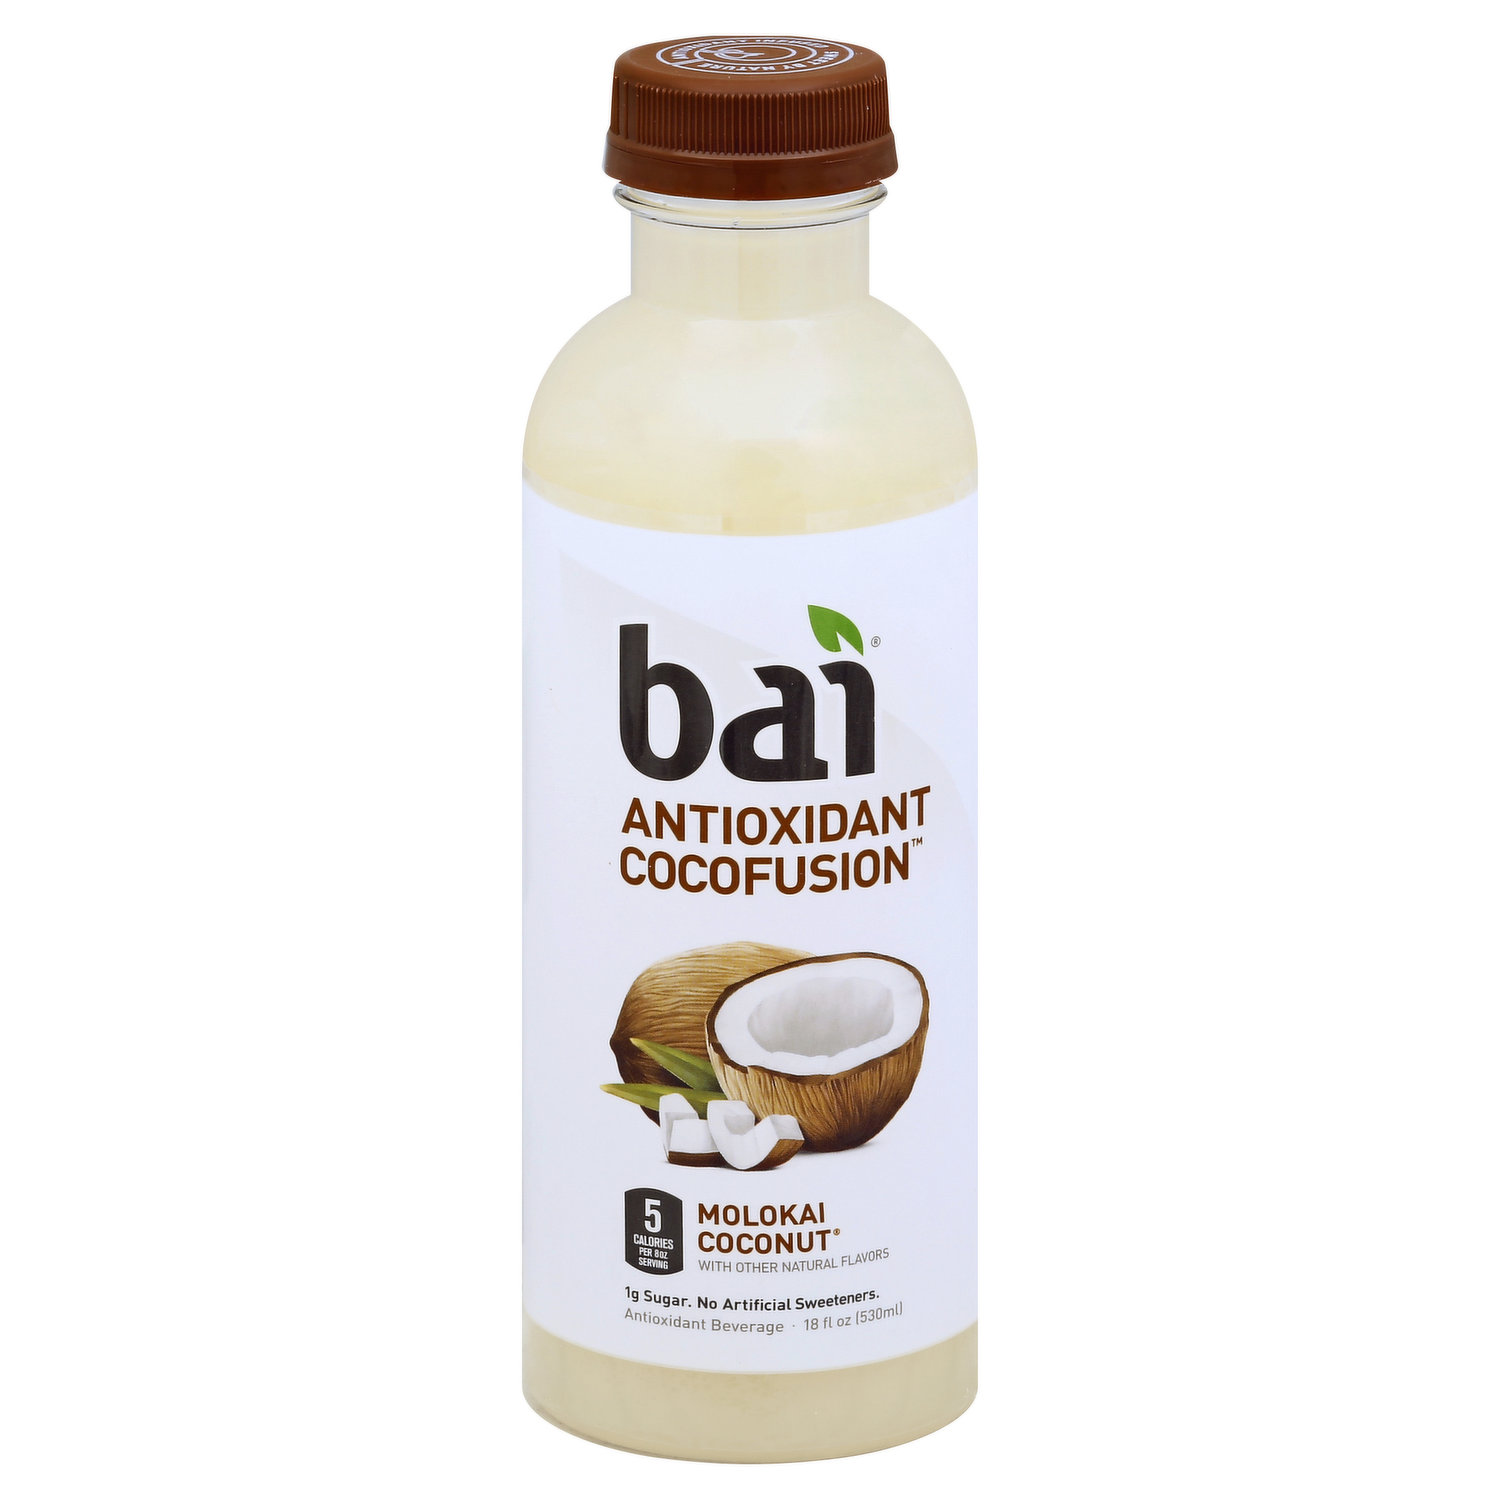 Bai Coconut Flavored Water, Molokai Coconut, Antioxidant Infused Drinks, 18  Fluid Ounce Bottles, (Pack of 12)